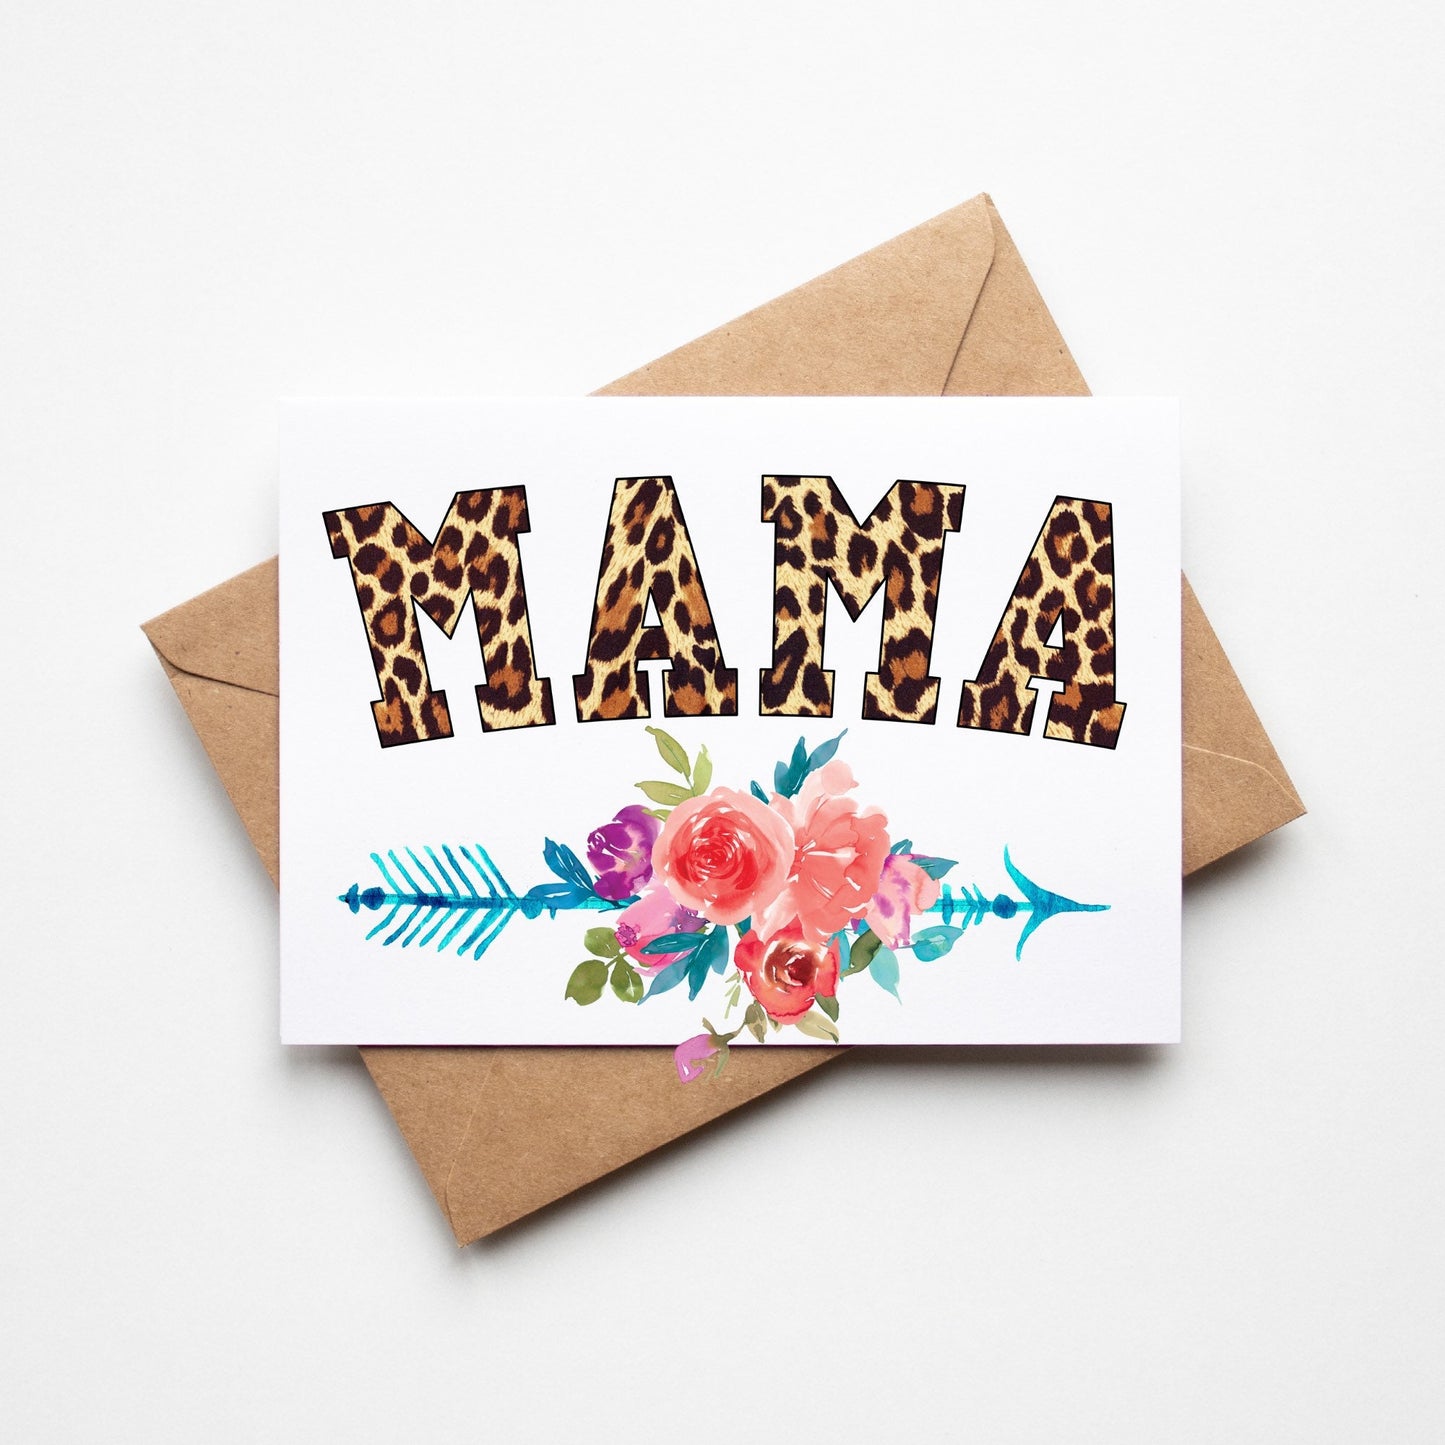 SUBLIMATION ready to press transfer- Country mom cheetah transfer design